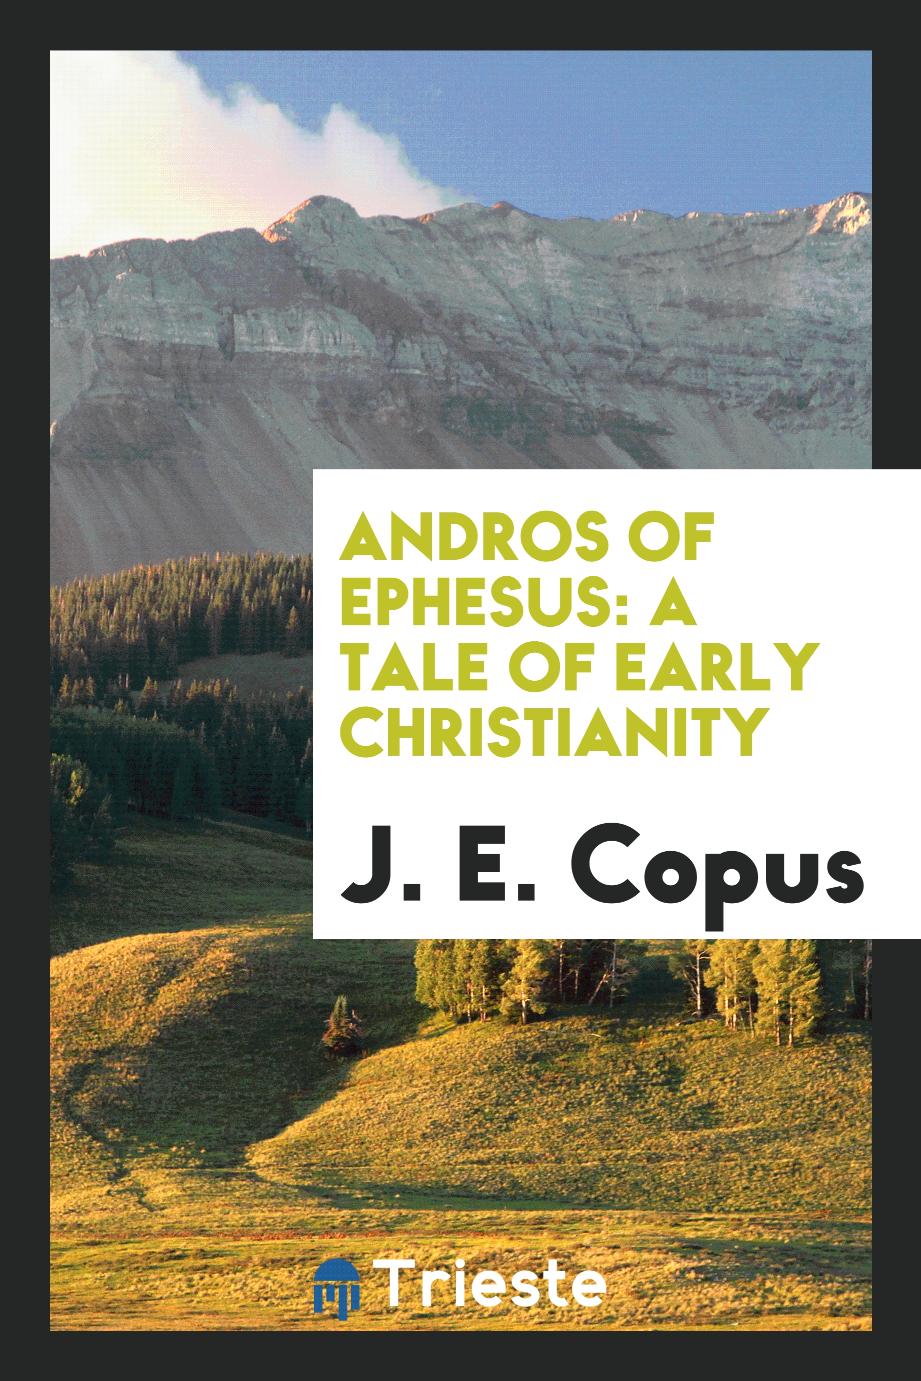 Andros of Ephesus: a tale of early Christianity